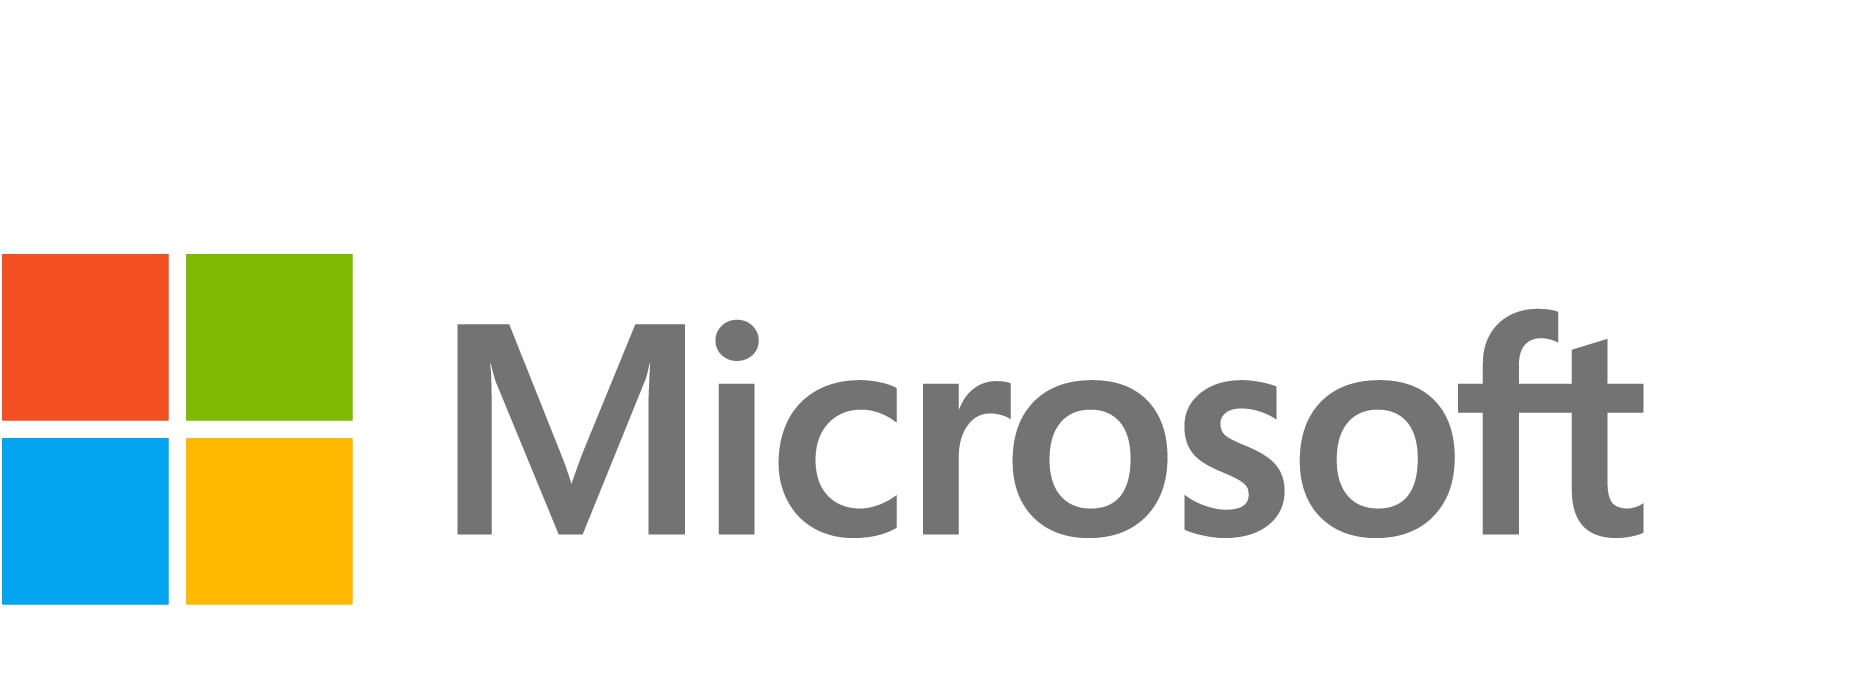 Microsoft Complete for Business with Accidental Damage from Handling - extended service agreement - 4 years - shipment